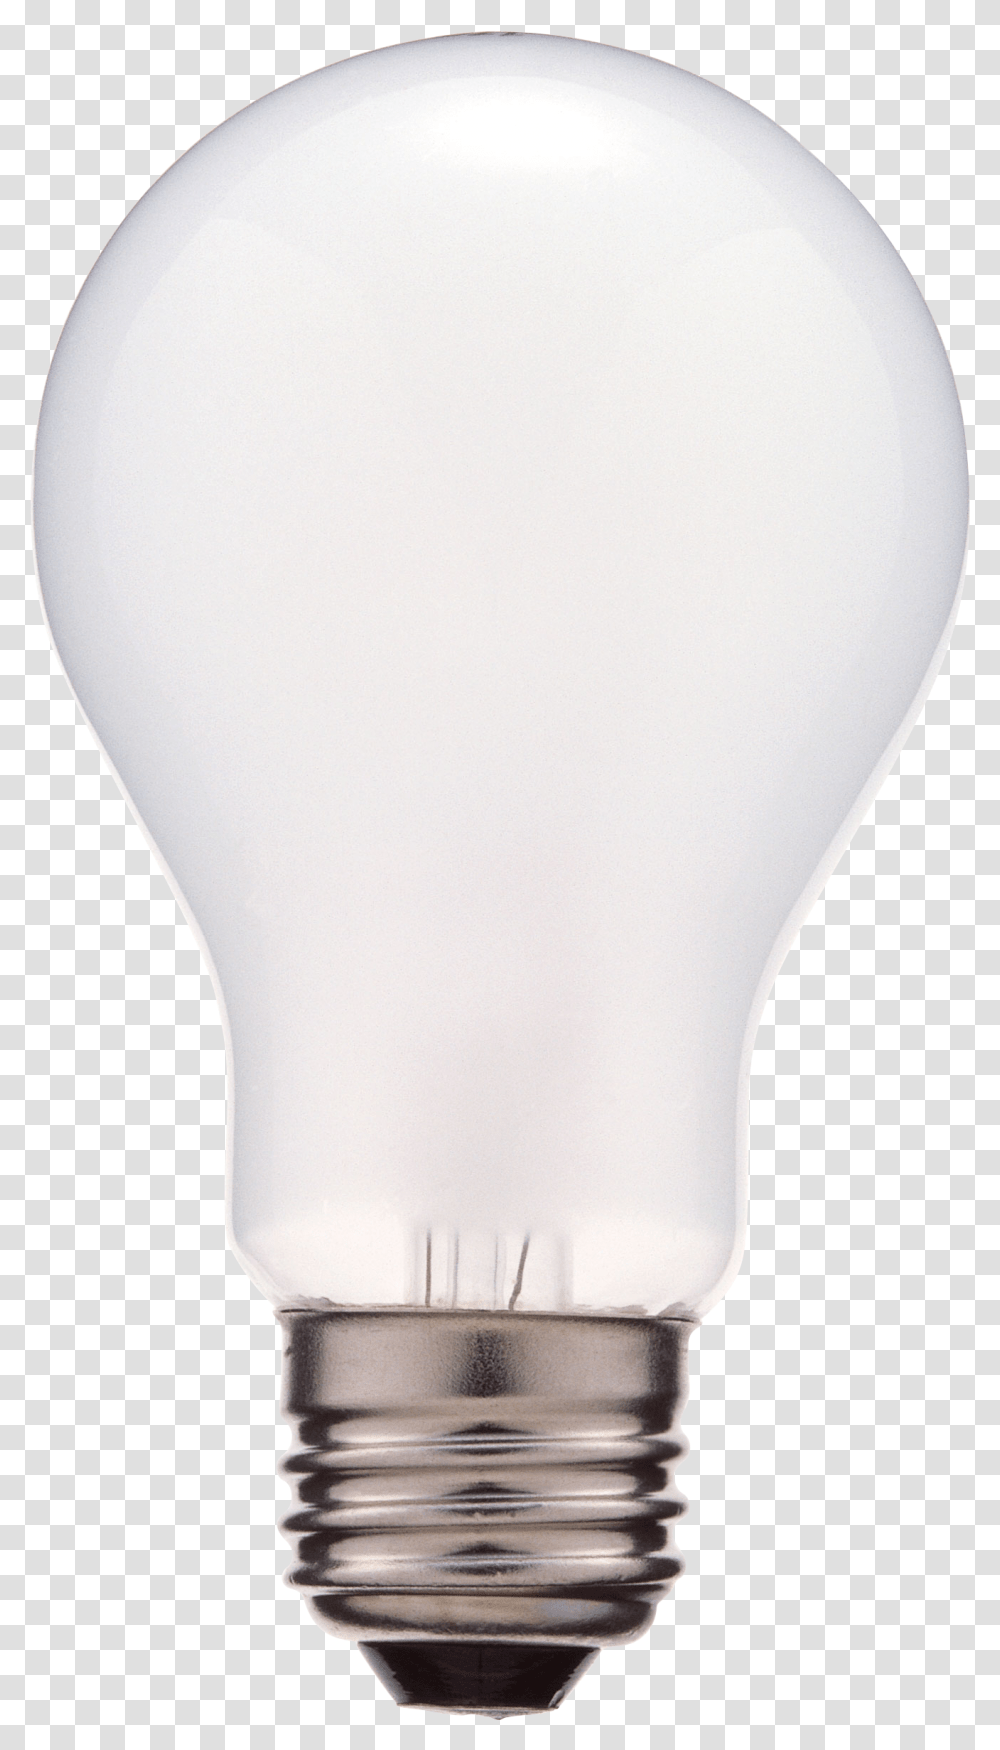 Lamp Image Electric Lighter Stained Glass Lamps Lampara Incandescente, Lightbulb, Balloon, Mixer, Appliance Transparent Png